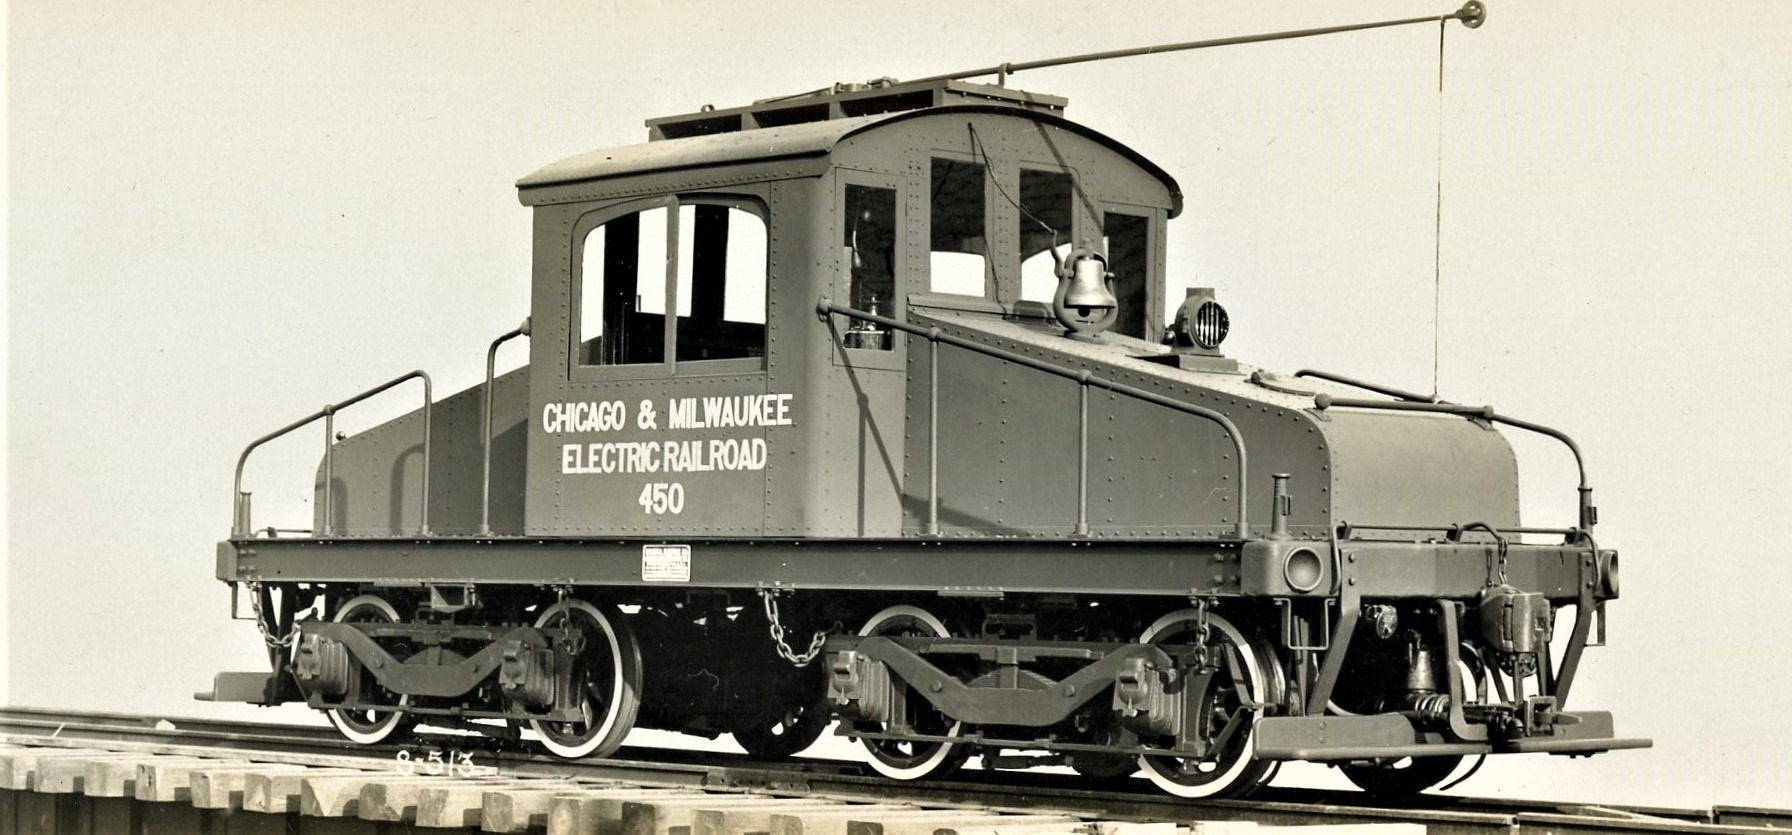 Chicago and Milwaukee Electric Railway | Schenectady, New York | Class 404-E73 #450 Steeple Cab Freight Motor | 1910 | Alco – GE photograph | NJCNRHS Collection